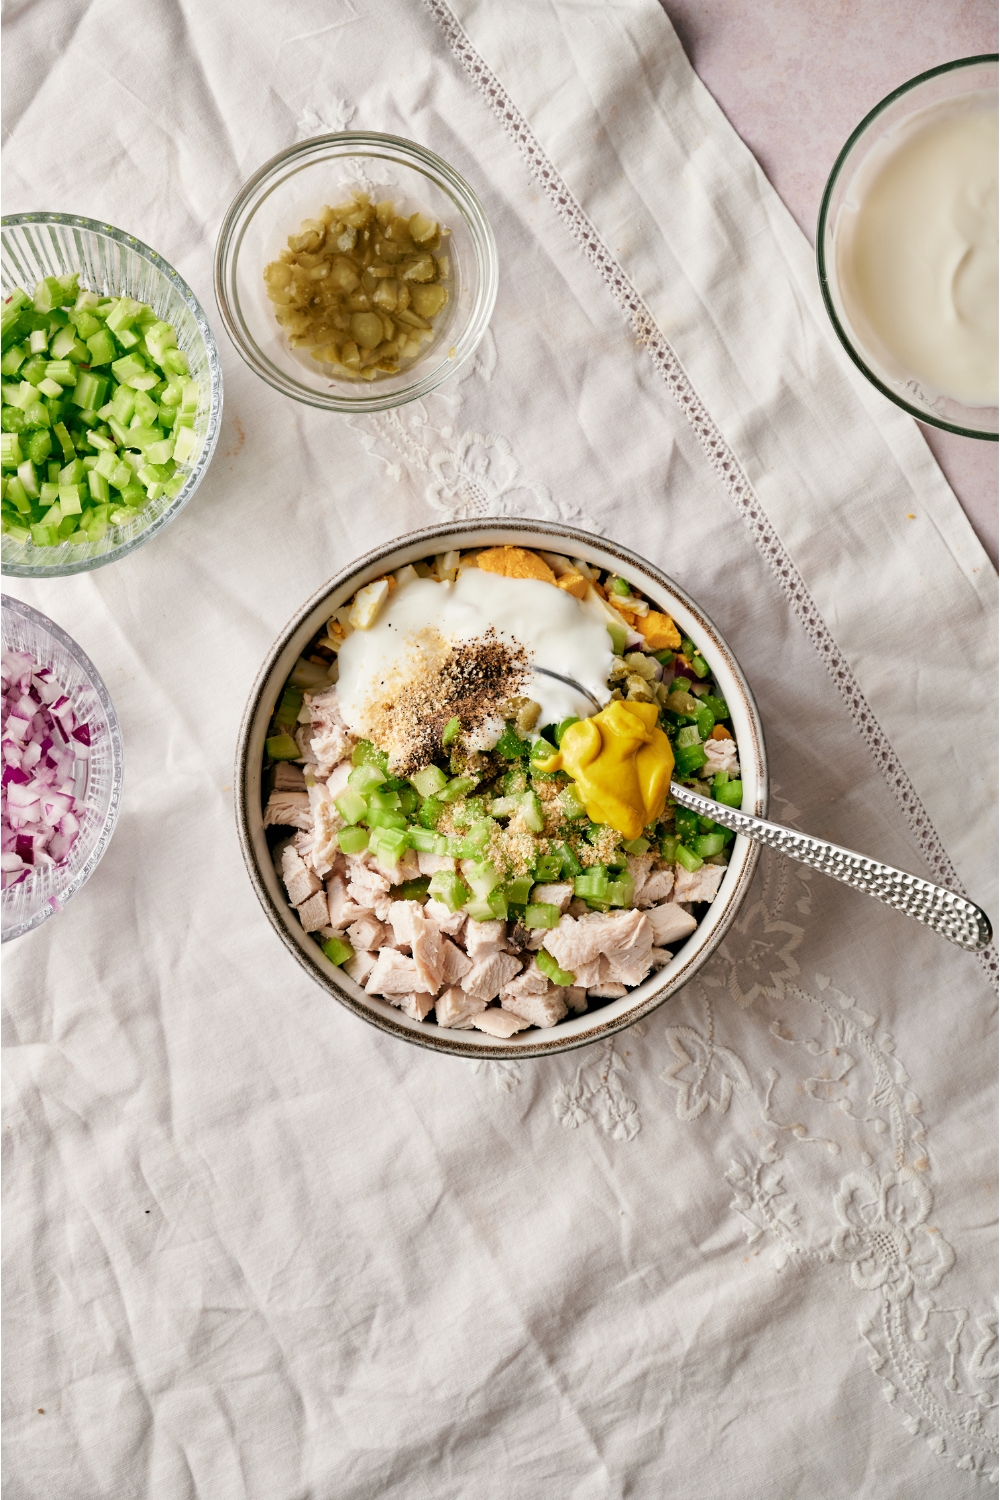 A bowl of cubed chicken with diced celery, chopped hard boiled eggs, mayonnaise, yellow mustard, and spices, with a spoon in the bowl.